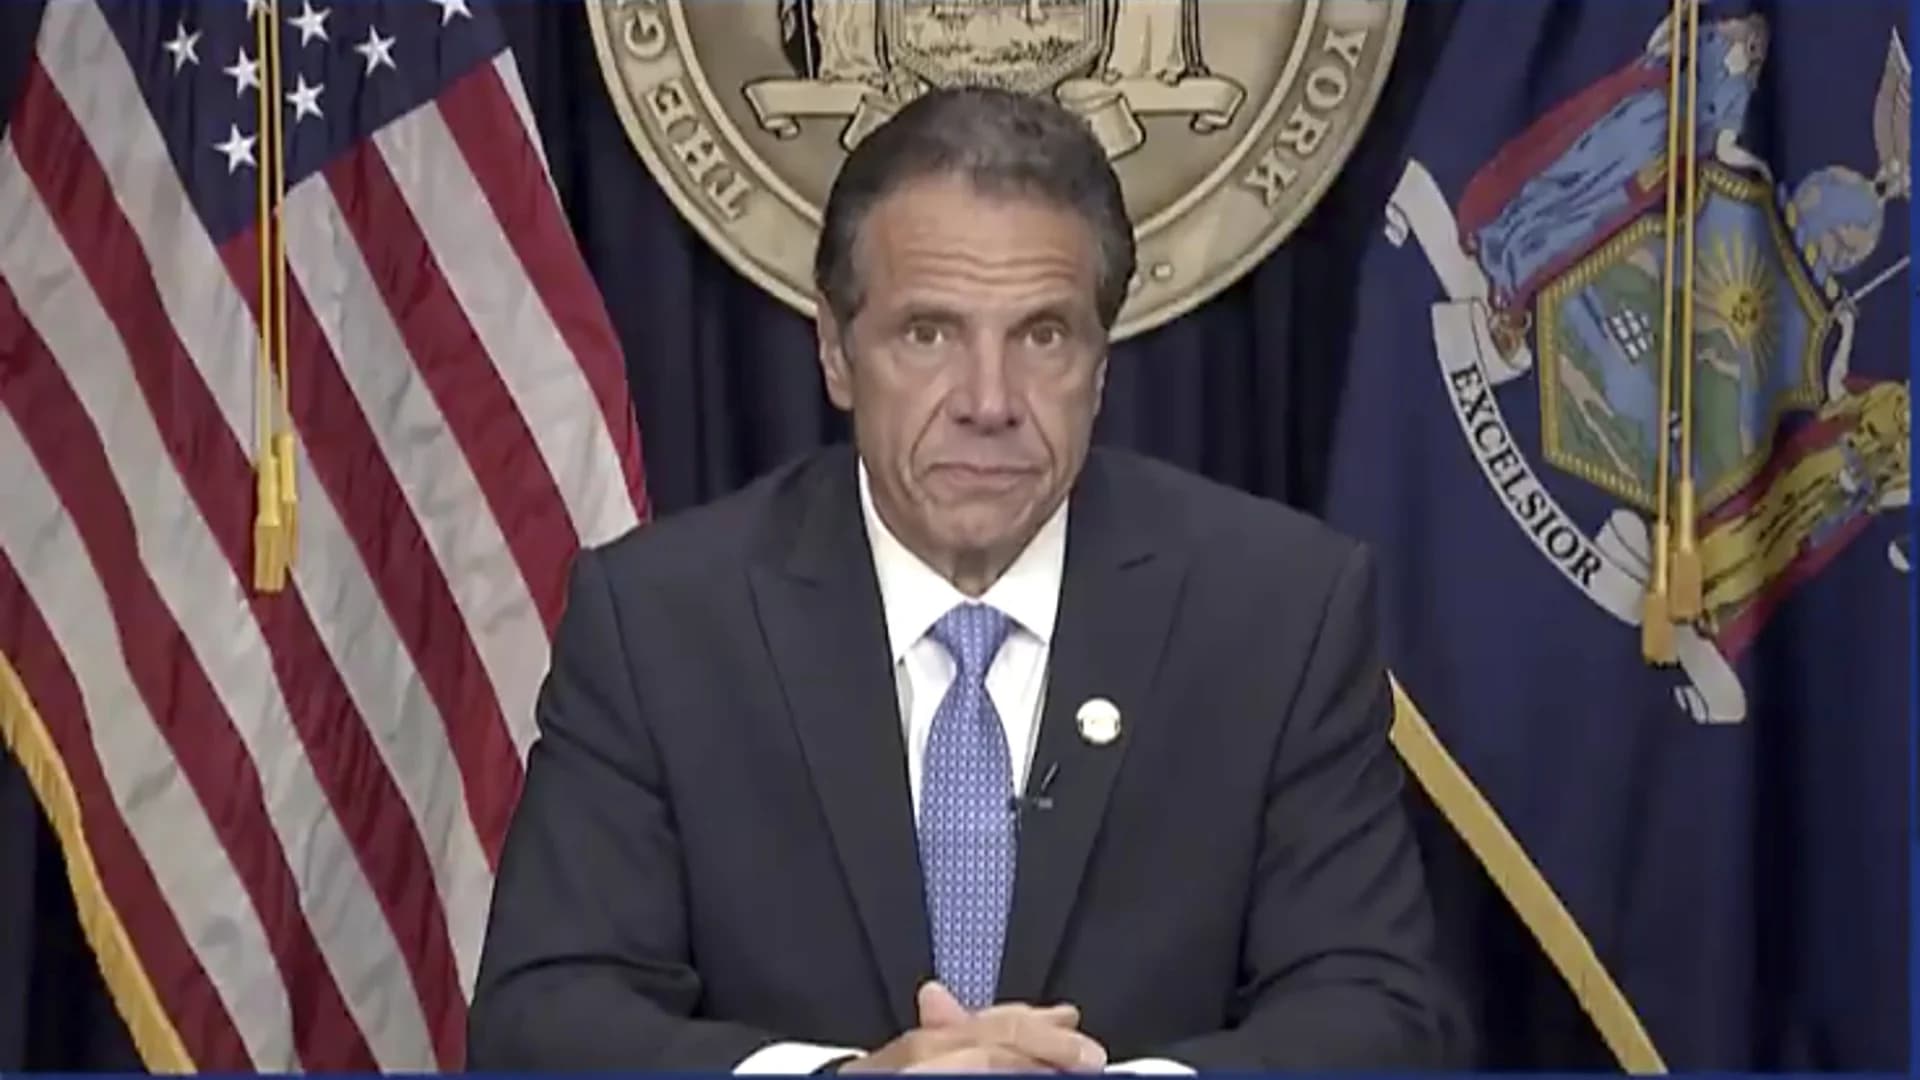 WATCH LIVE: Announcement by Andrew Cuomo's Attorney